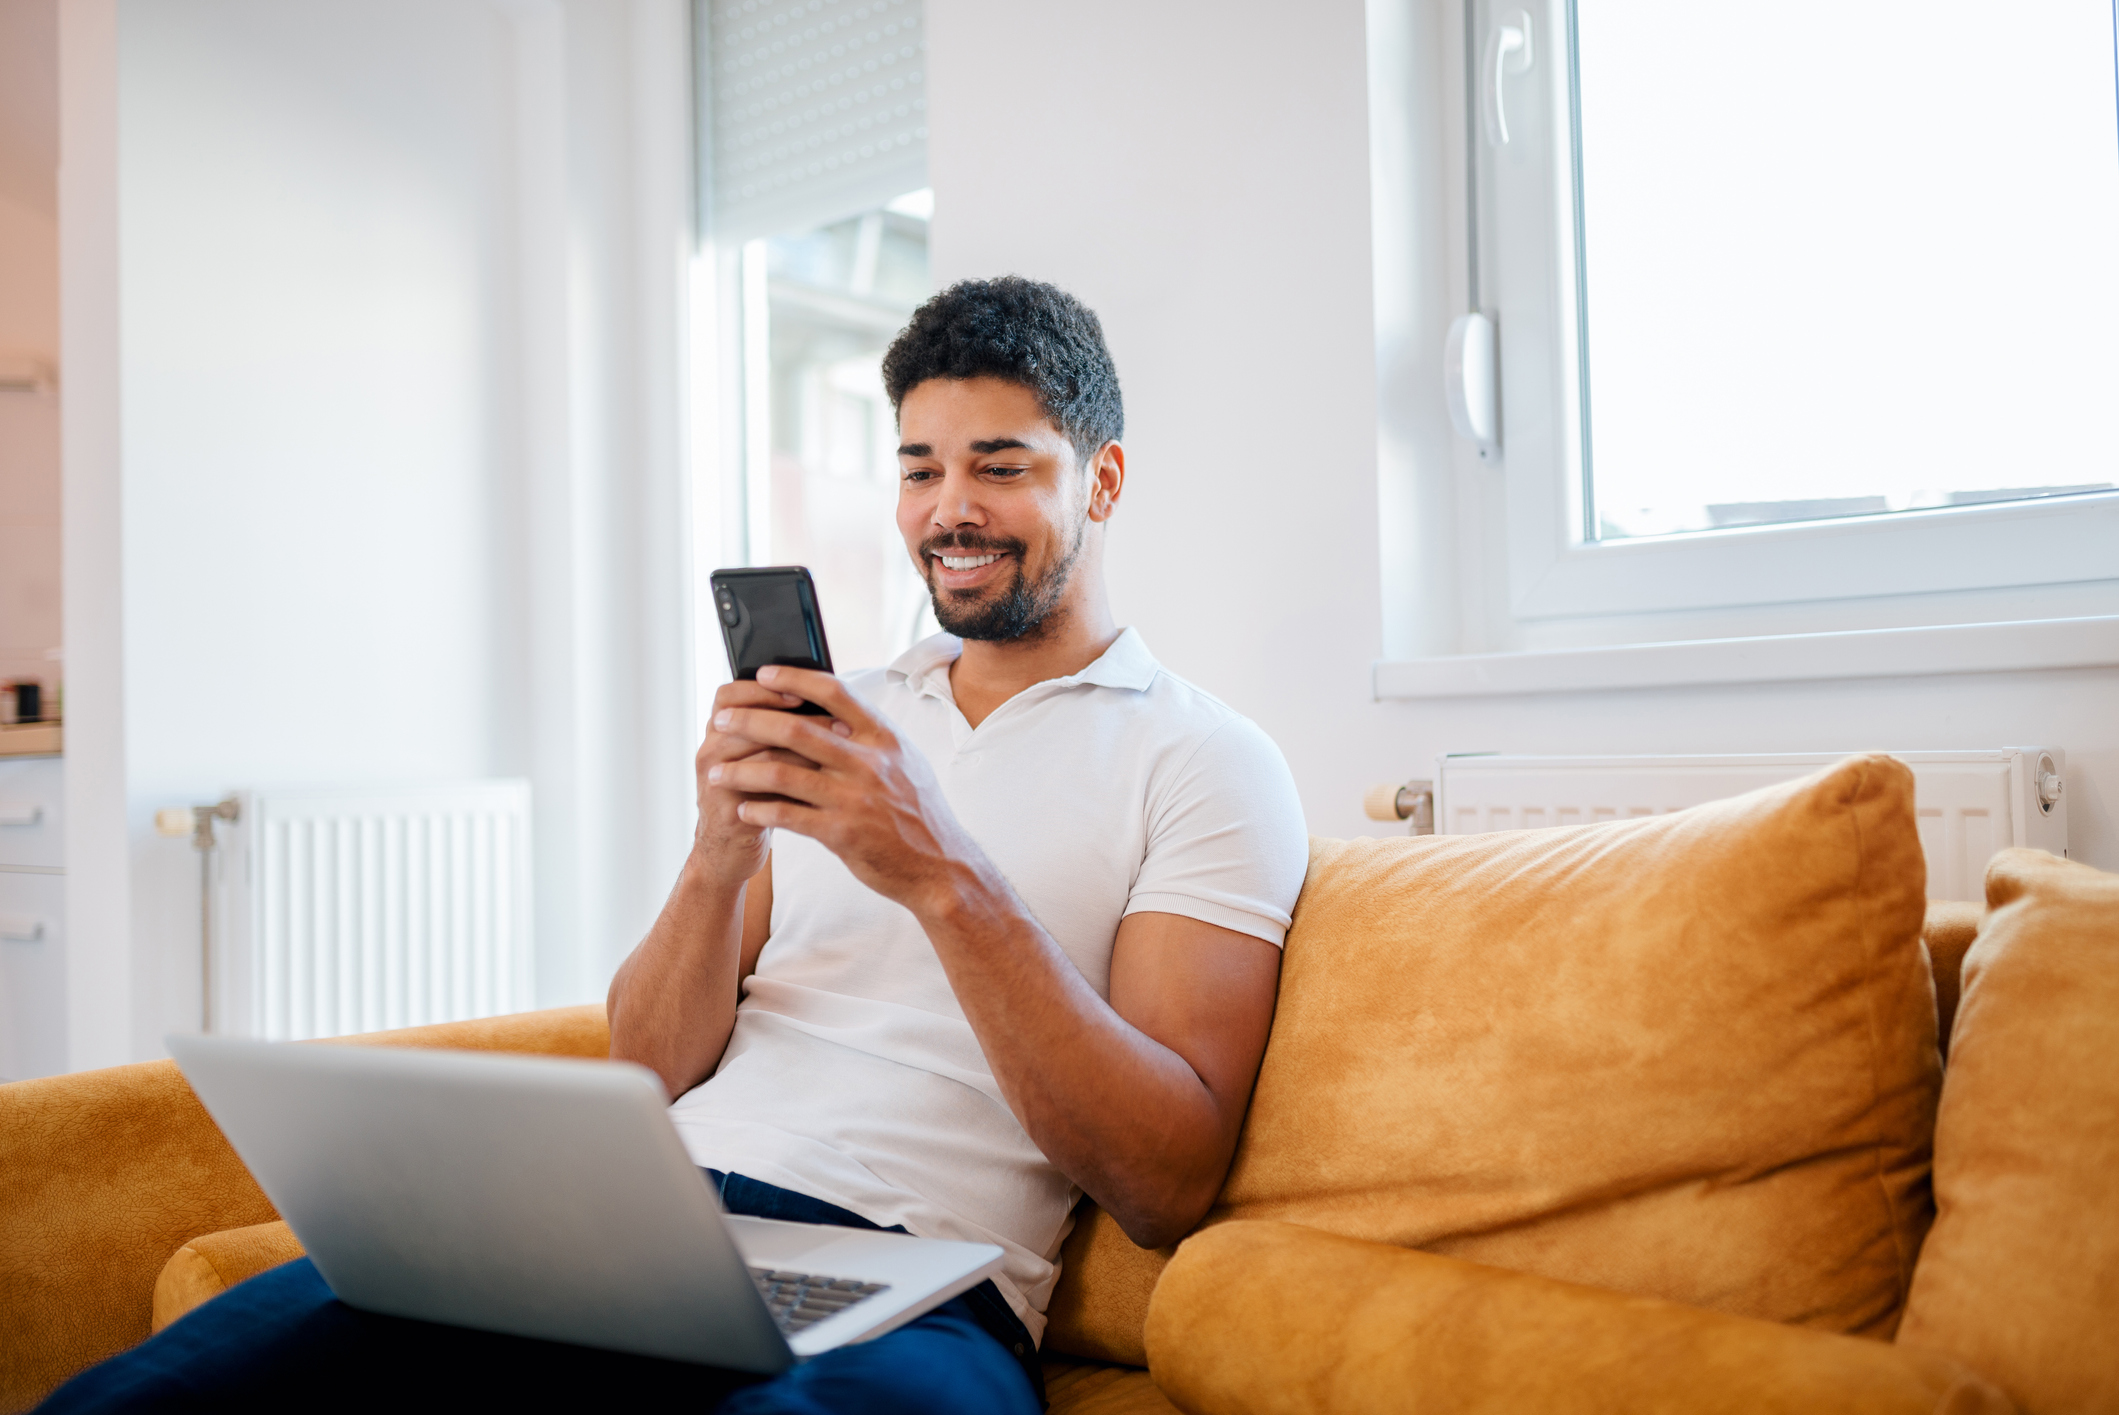 A cheerful man sitting on a sofa with a laptop and checking his phone